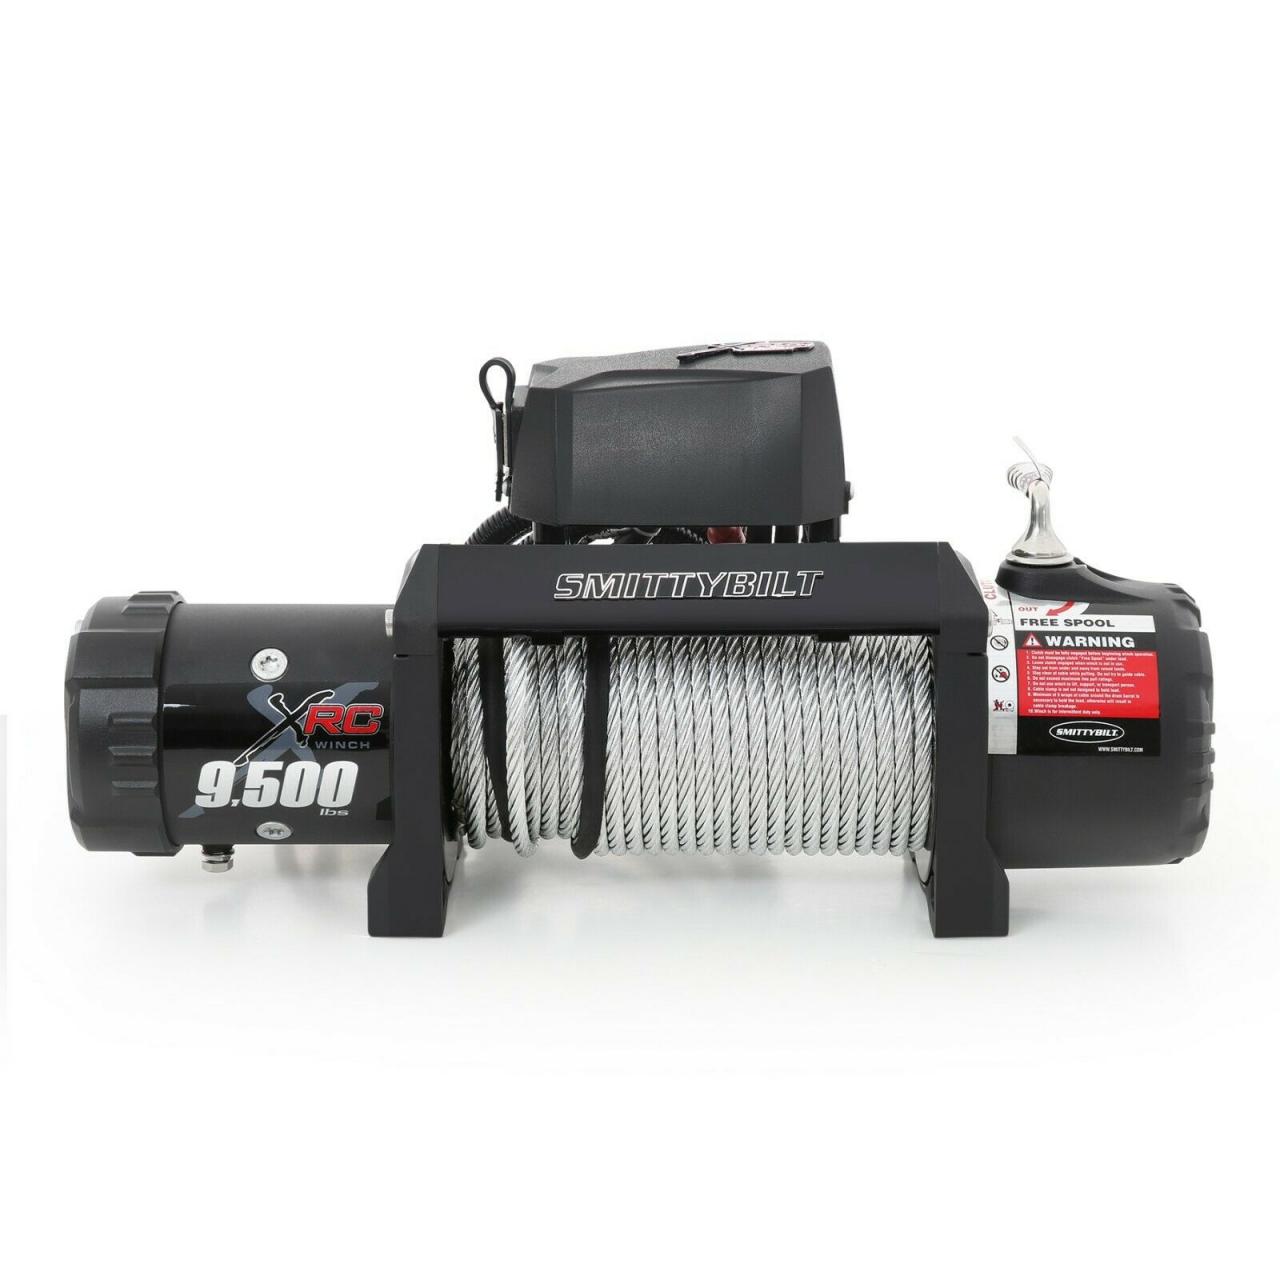 Smittybilt XRC 9500lb Winch - Most Complete Review [2021]